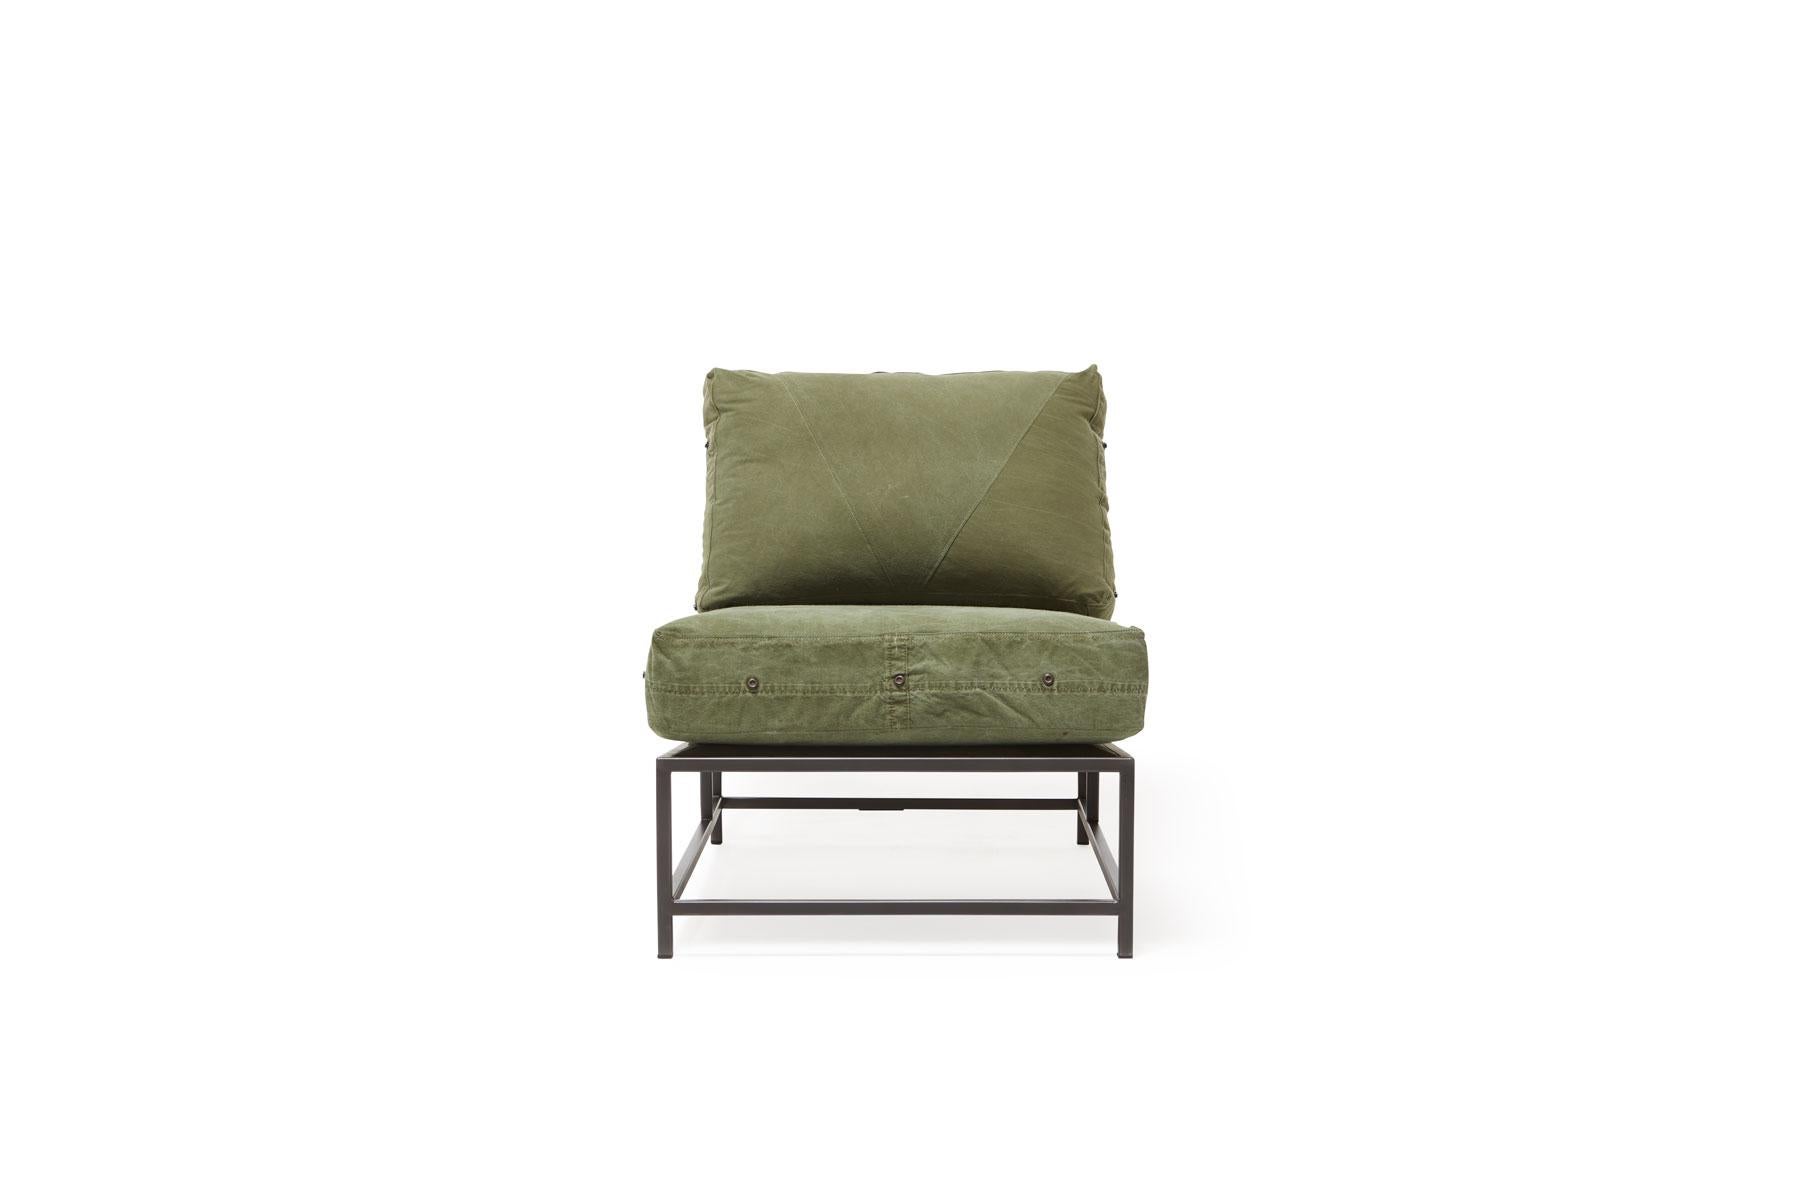 The Inheritance chair by Stephen Kenn is as comfortable as it is unique. The design features an exposed construction composed of three elements - a steel frame, plush upholstery, and supportive belts. The deep seating area is perfect for a relaxing